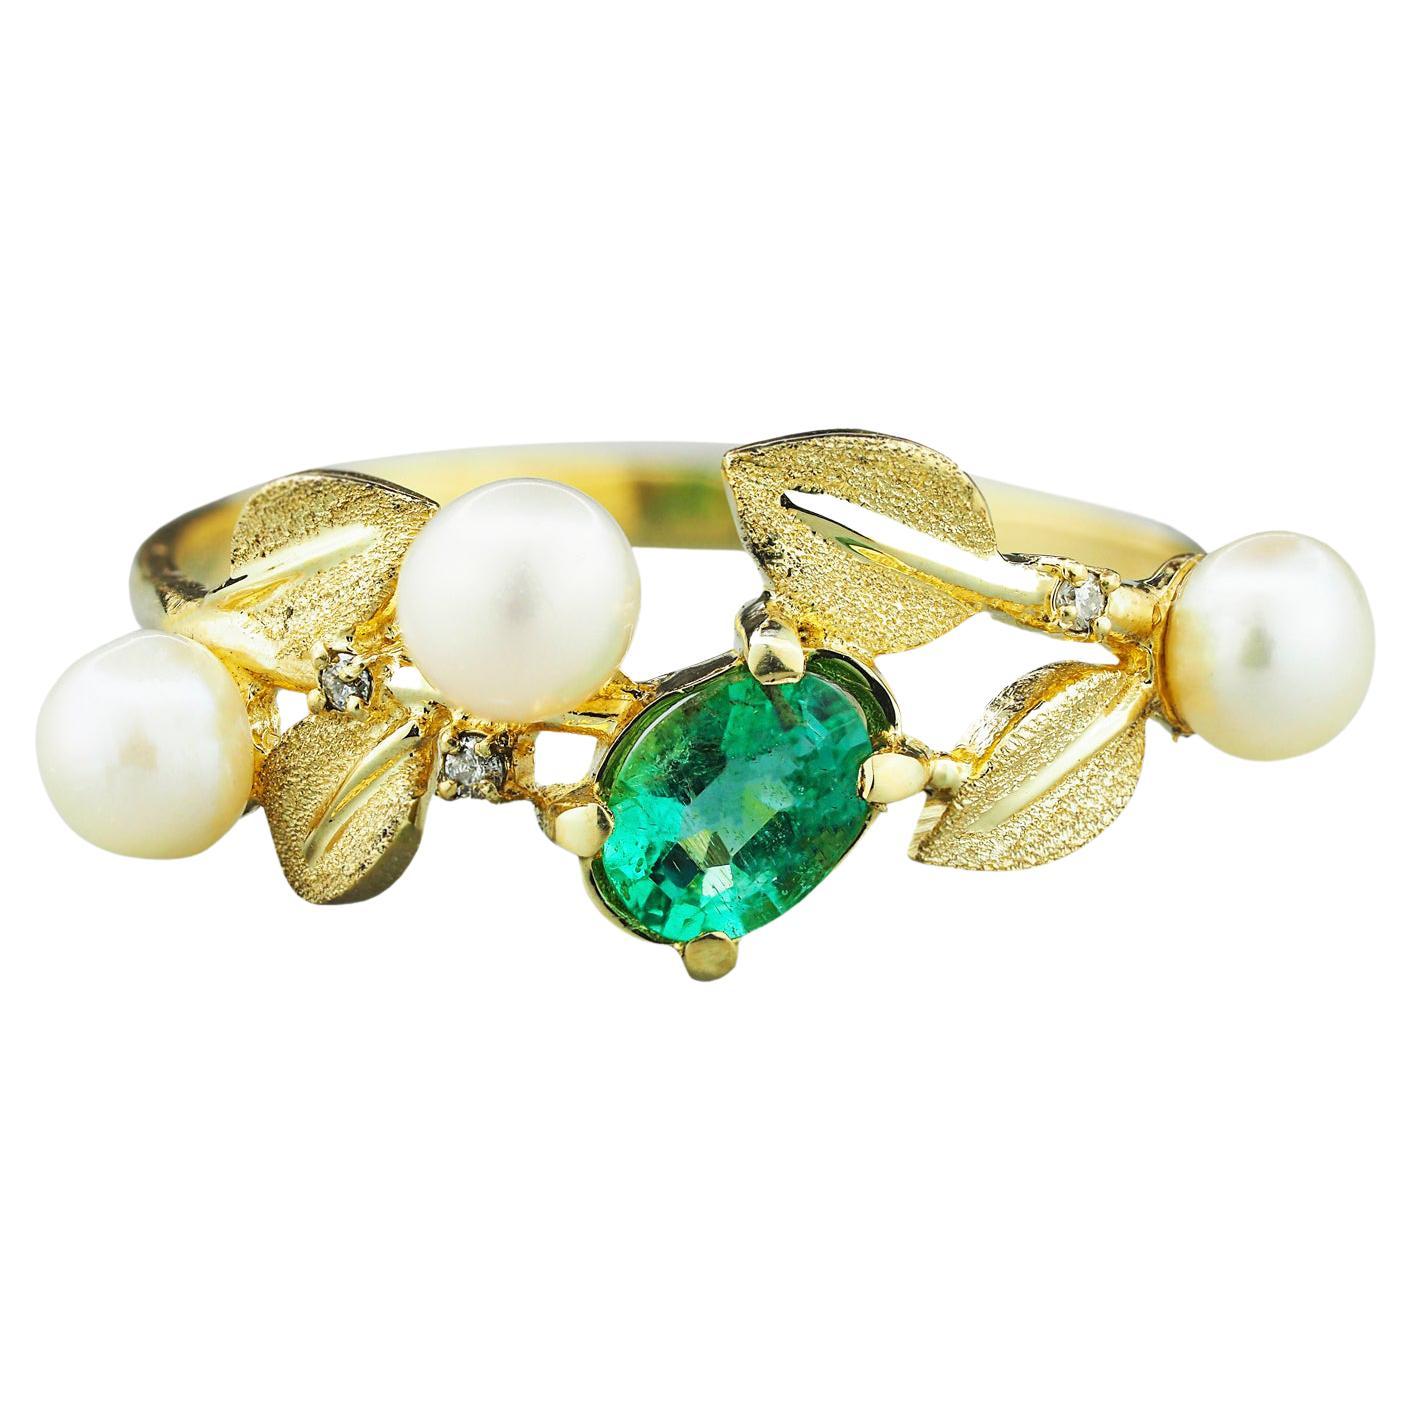 For Sale:  14k Gold Ring with Emerald, Pearls and Diamonds